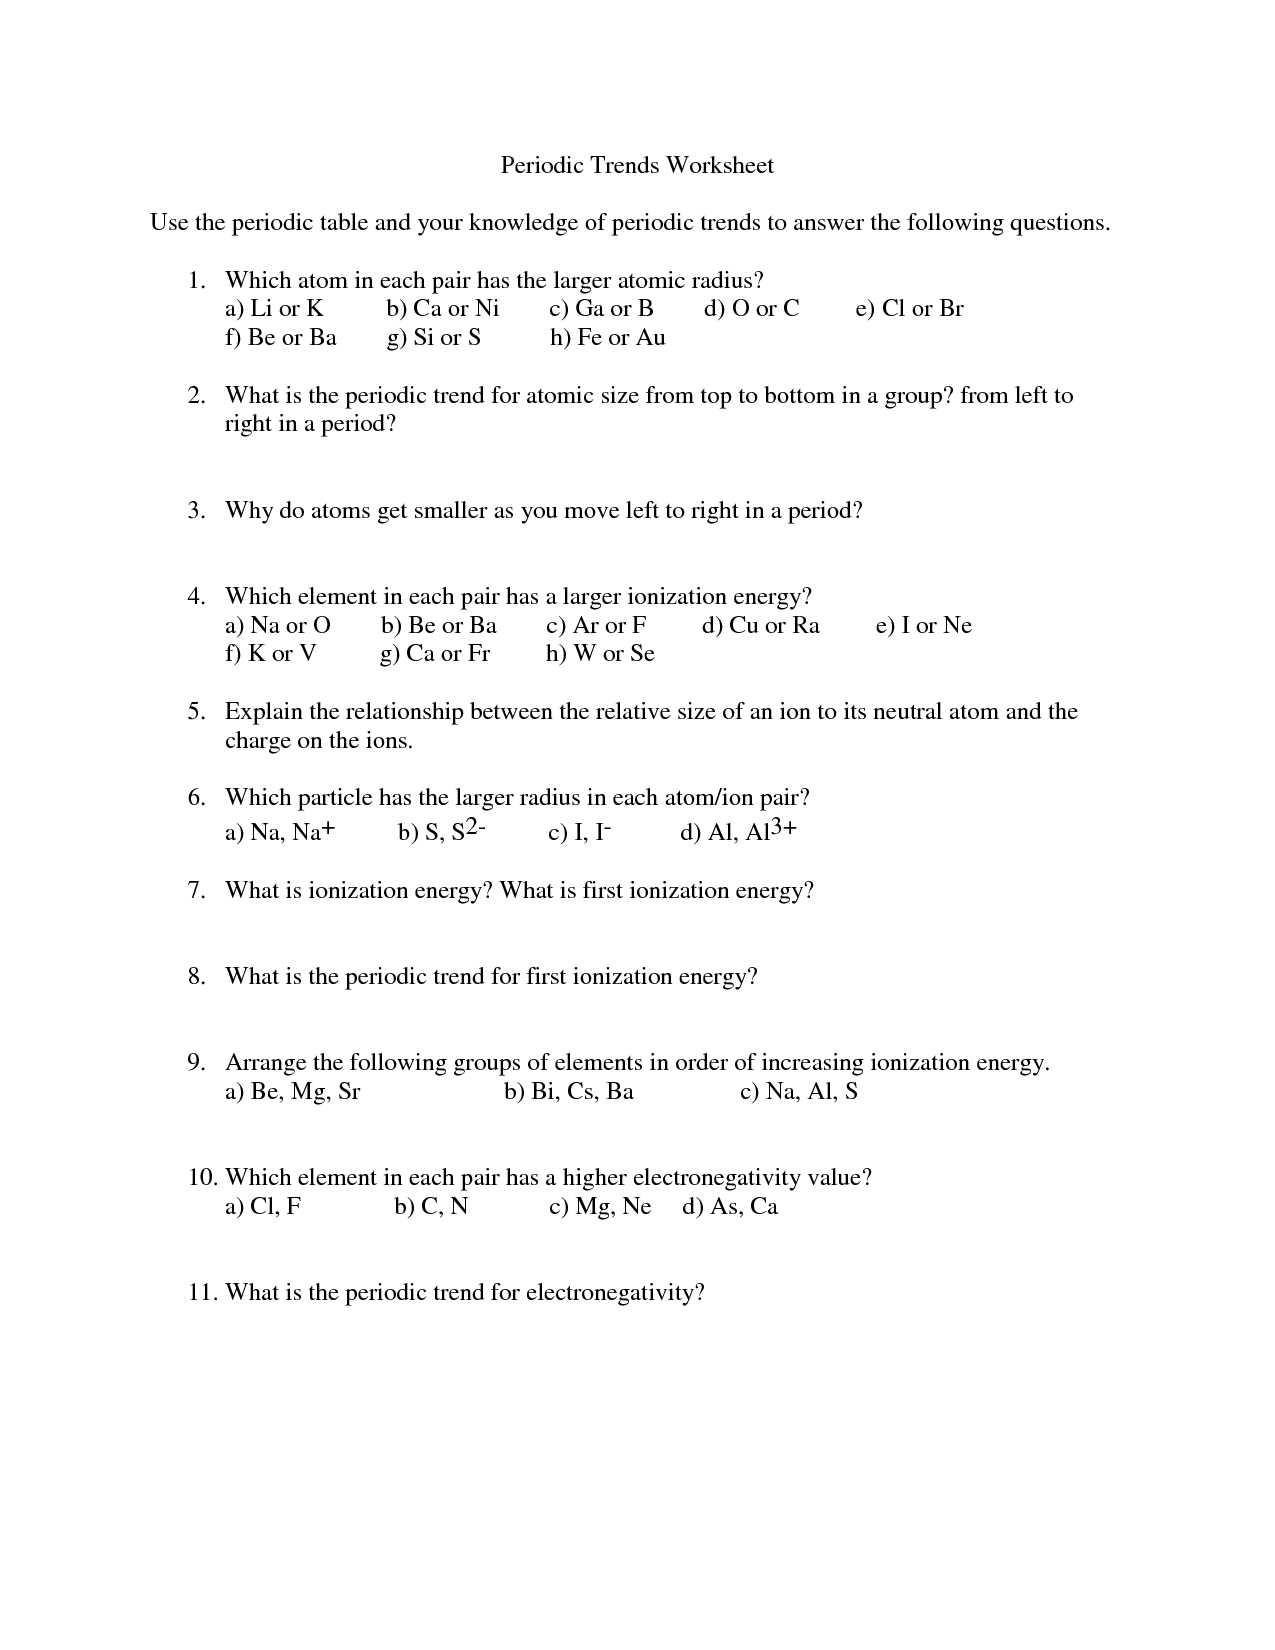 Nuclear Chemistry Worksheet Answer Key Along with Periodic Trends Worksheet Answers Cadrecorner